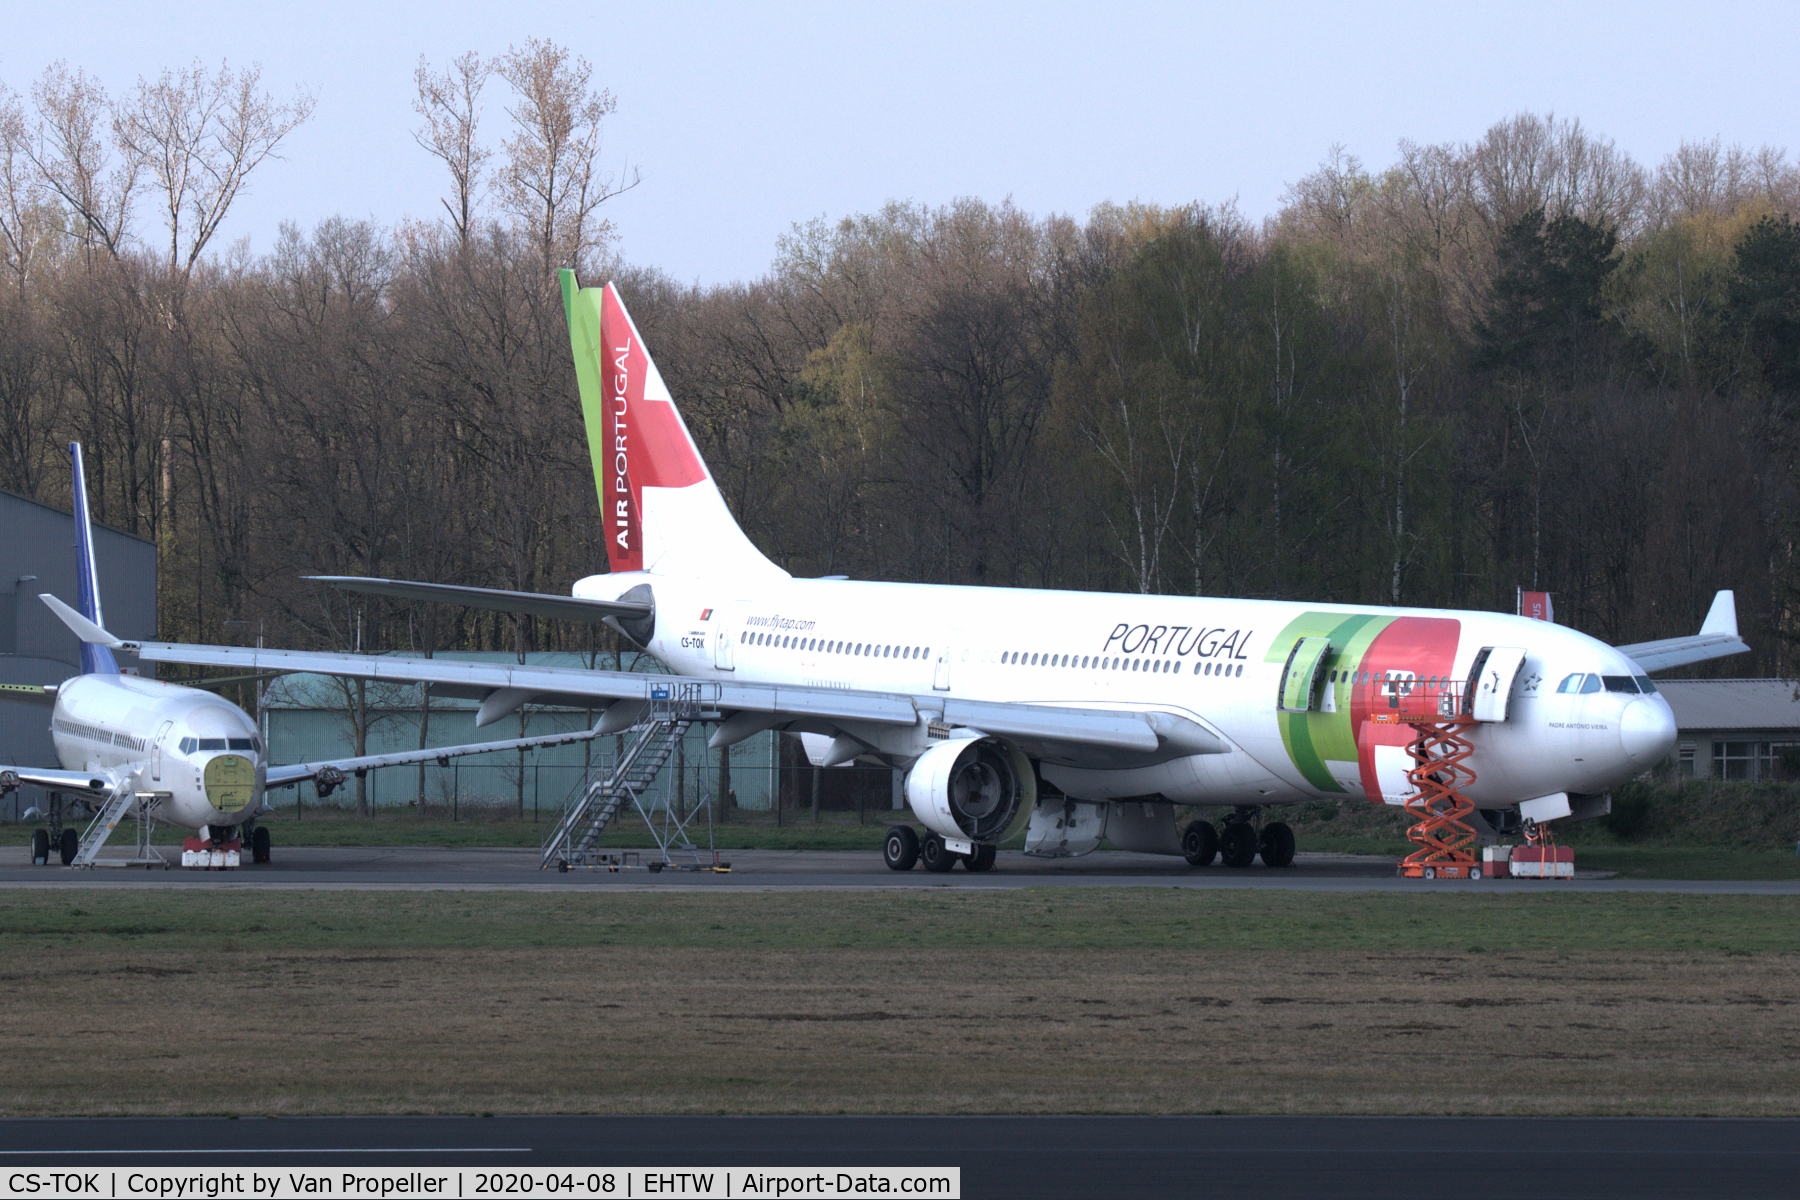 CS-TOK, 2000 Airbus A330-223 C/N 317, TAP Air Portugal Airbus A330-223 with the demolition man, AELS, at Twente airport, the Netherlands.